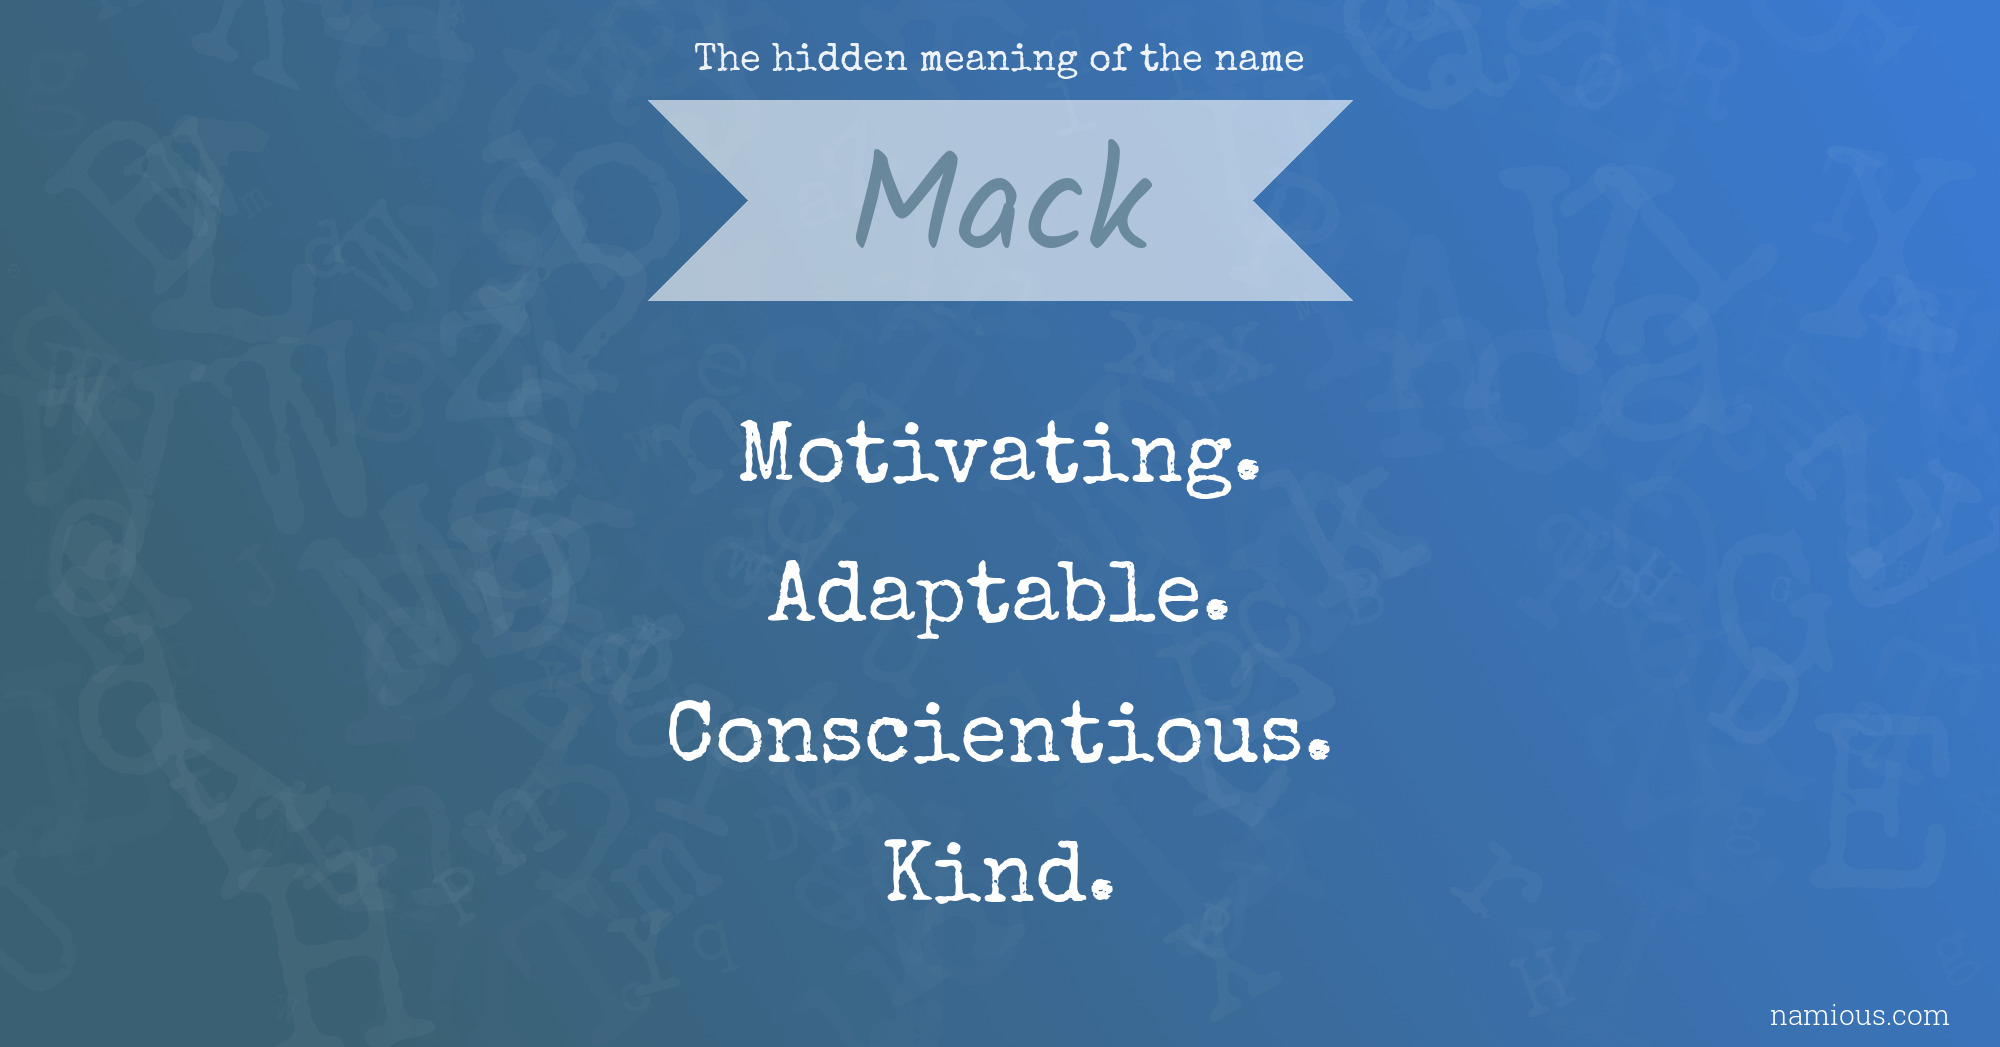 The hidden meaning of the name Mack